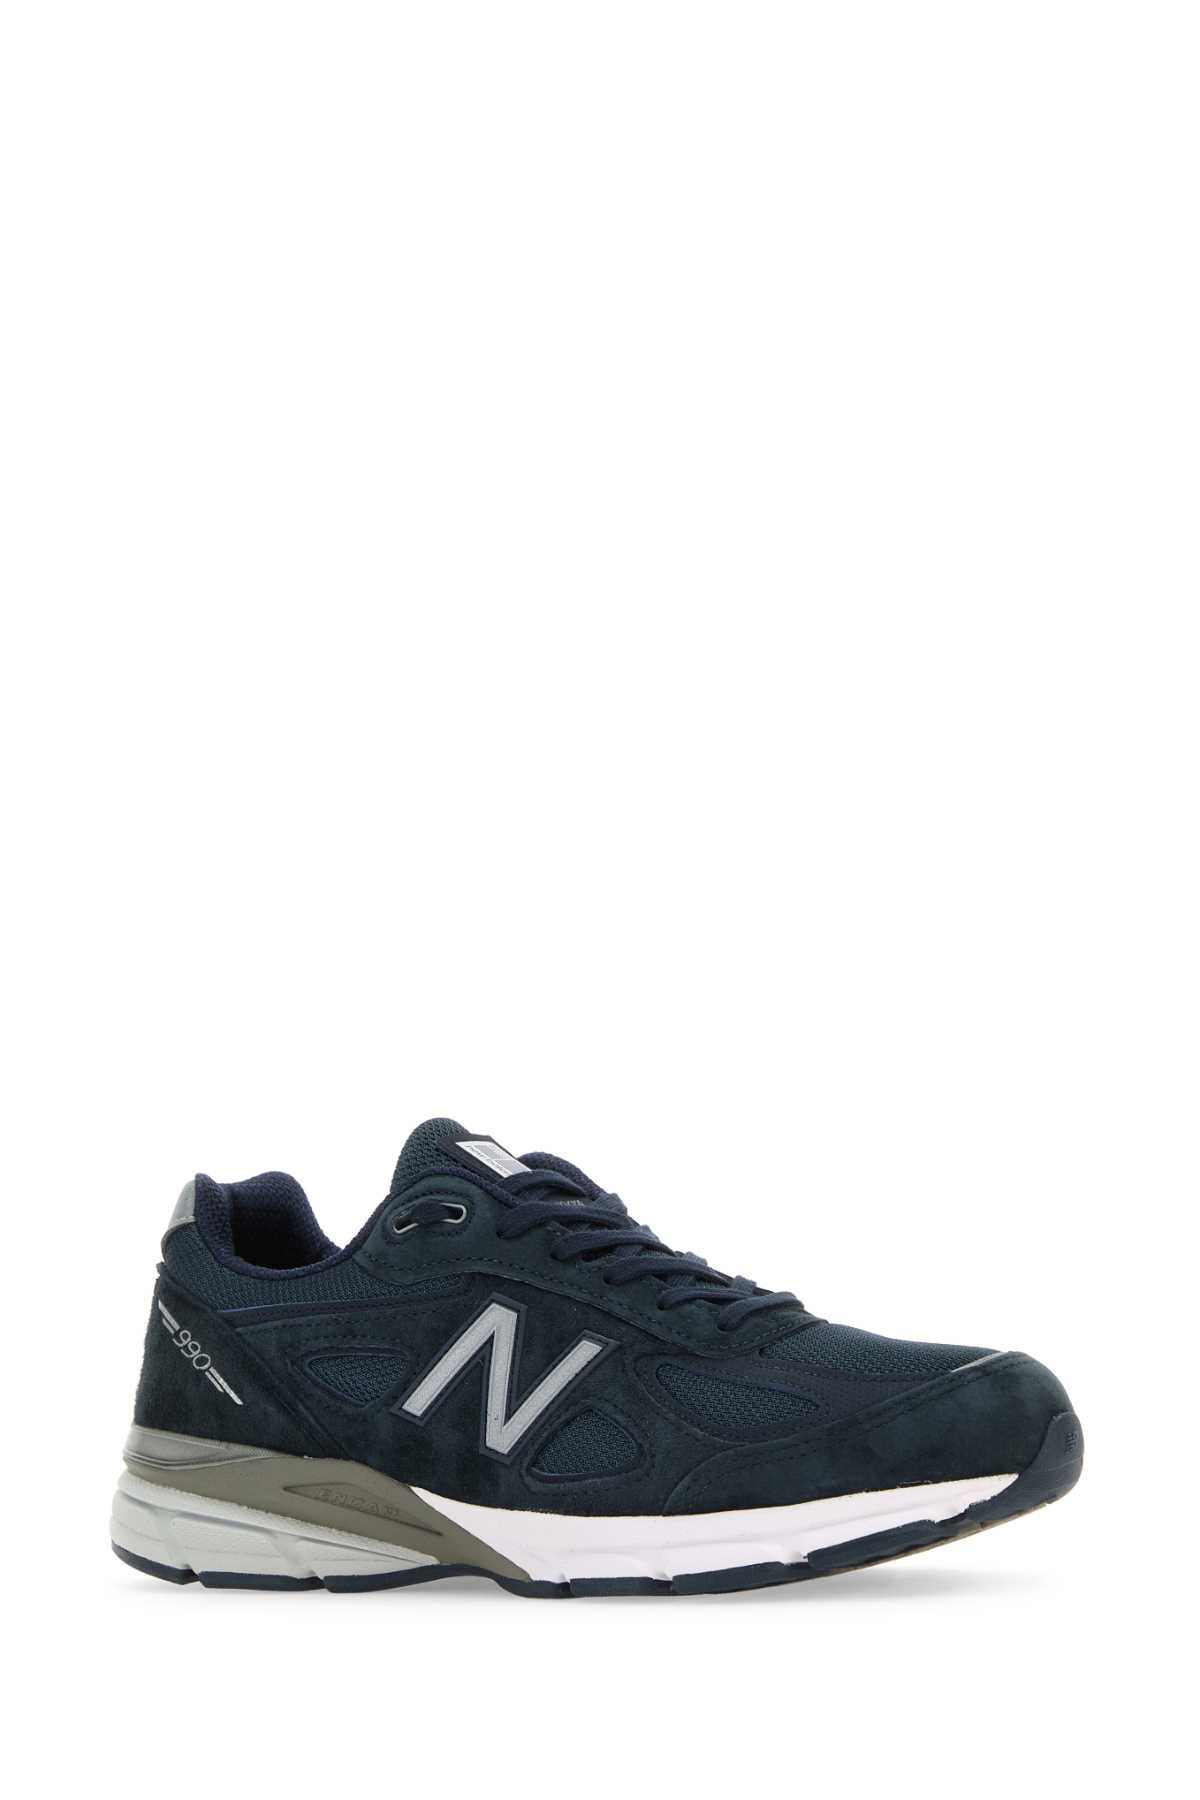 Shop New Balance Blue Fabric And Suede 990v4 Sneakers In Navy